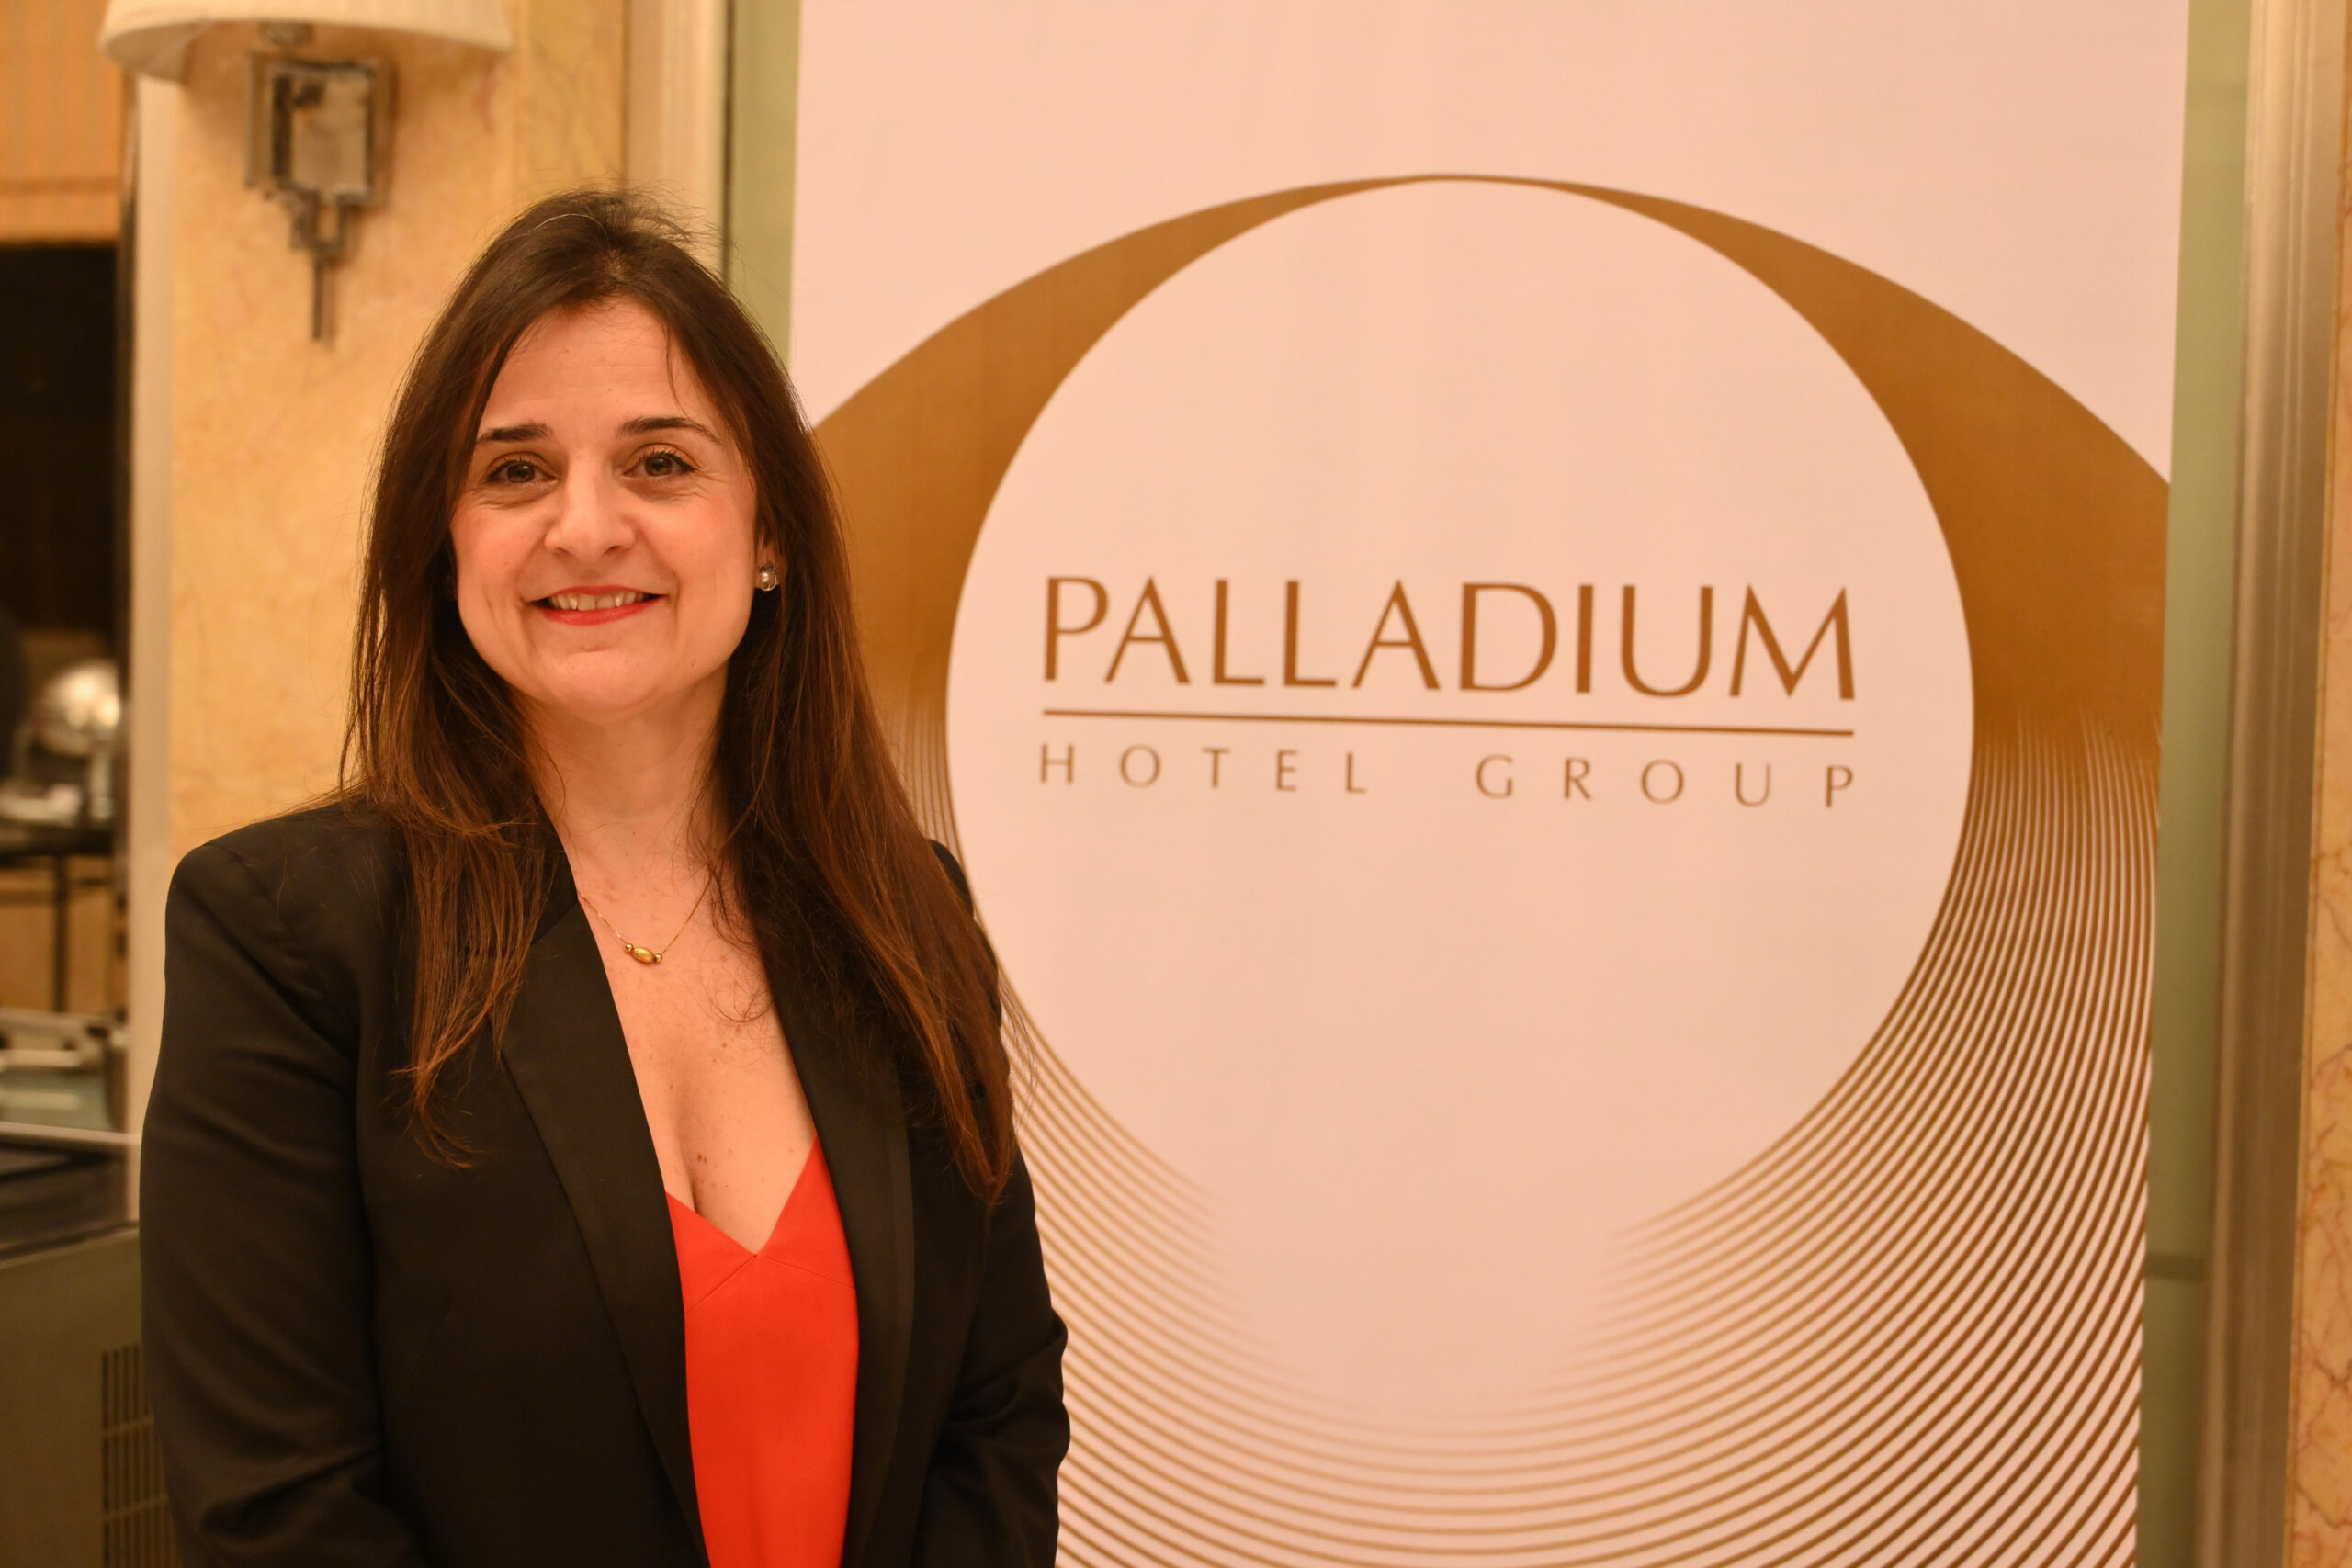 ‘India has always been a priority market for Palladium Hotel Group’